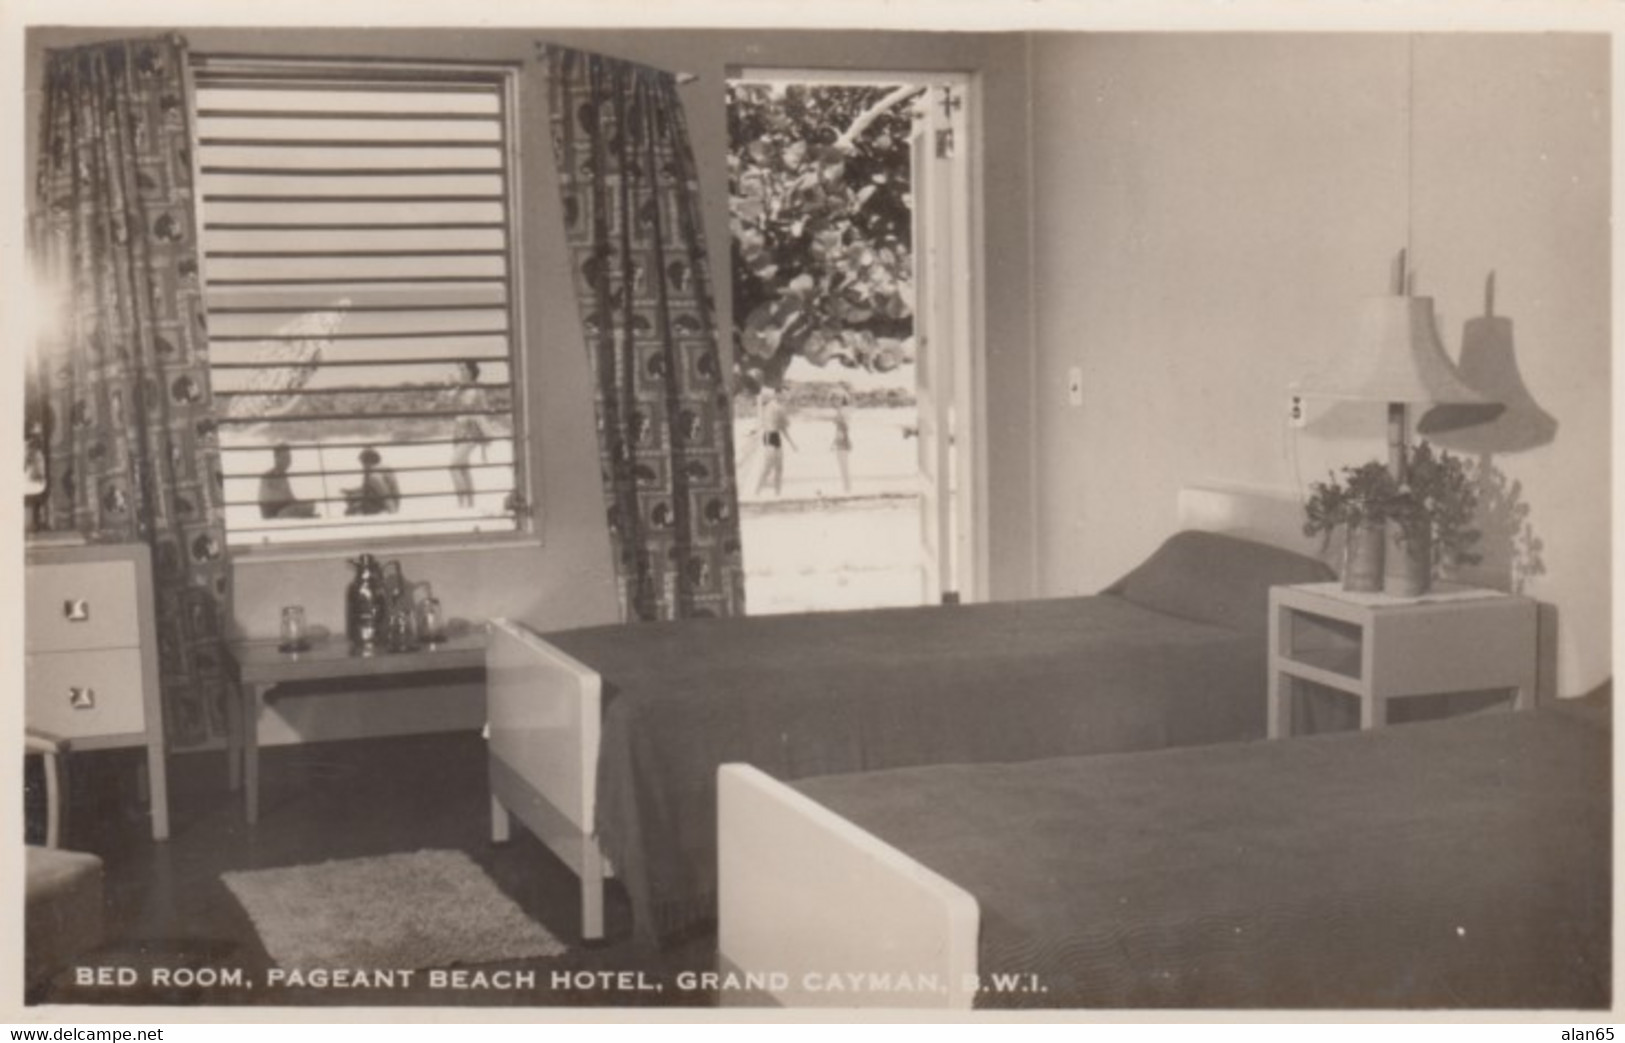 Grand Cayman BWI, Pageant Beach Hotel Bedroom Interior View, C1940s/50s Vintage Real Photo Postcard - Cayman (Isole)